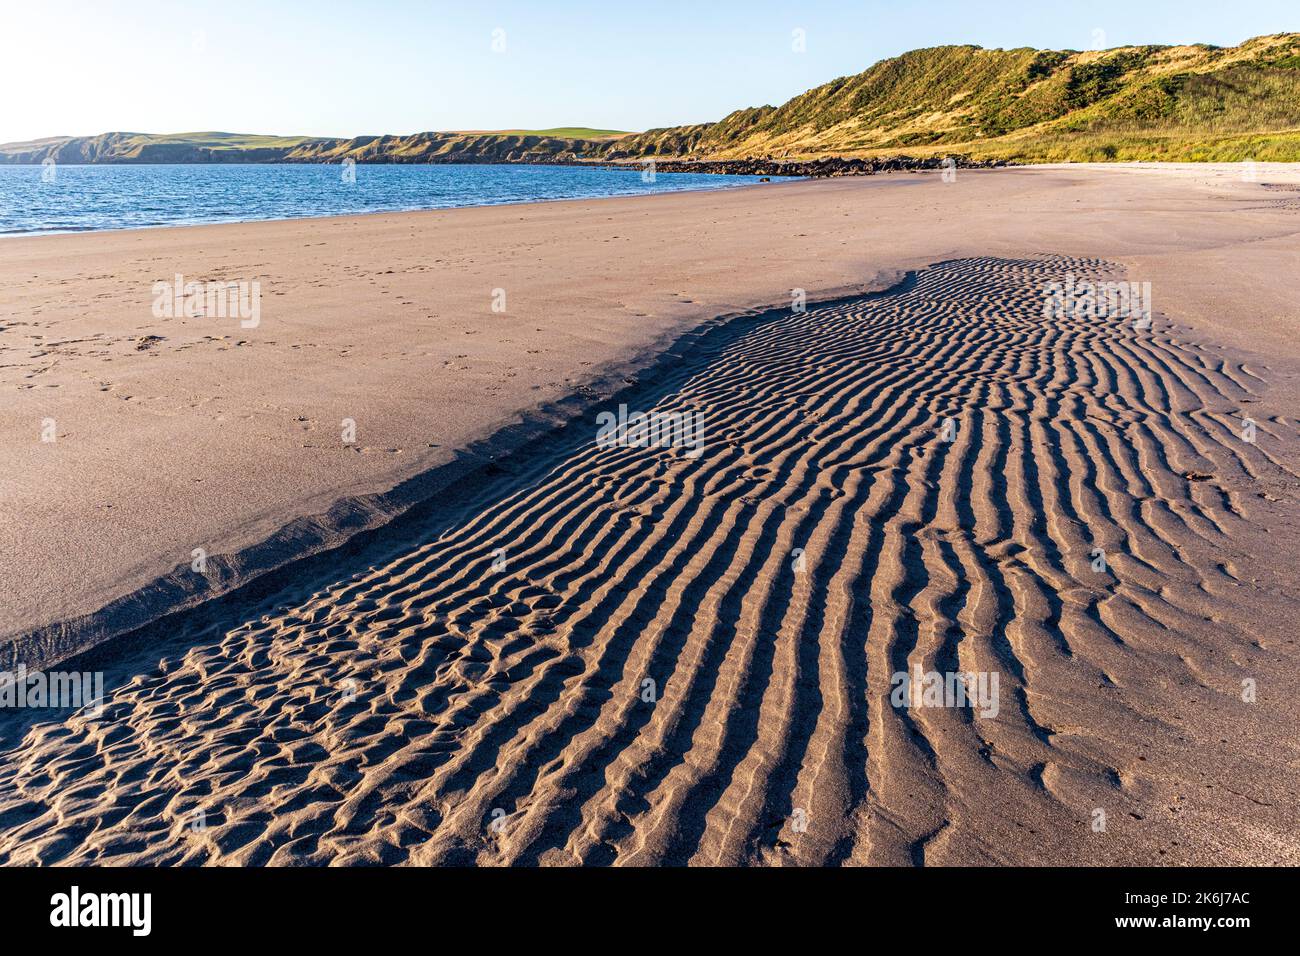 Evening light on patterns in the sand at Ardwell Bay, Dumfries & Galloway, Scotland UK Stock Photo